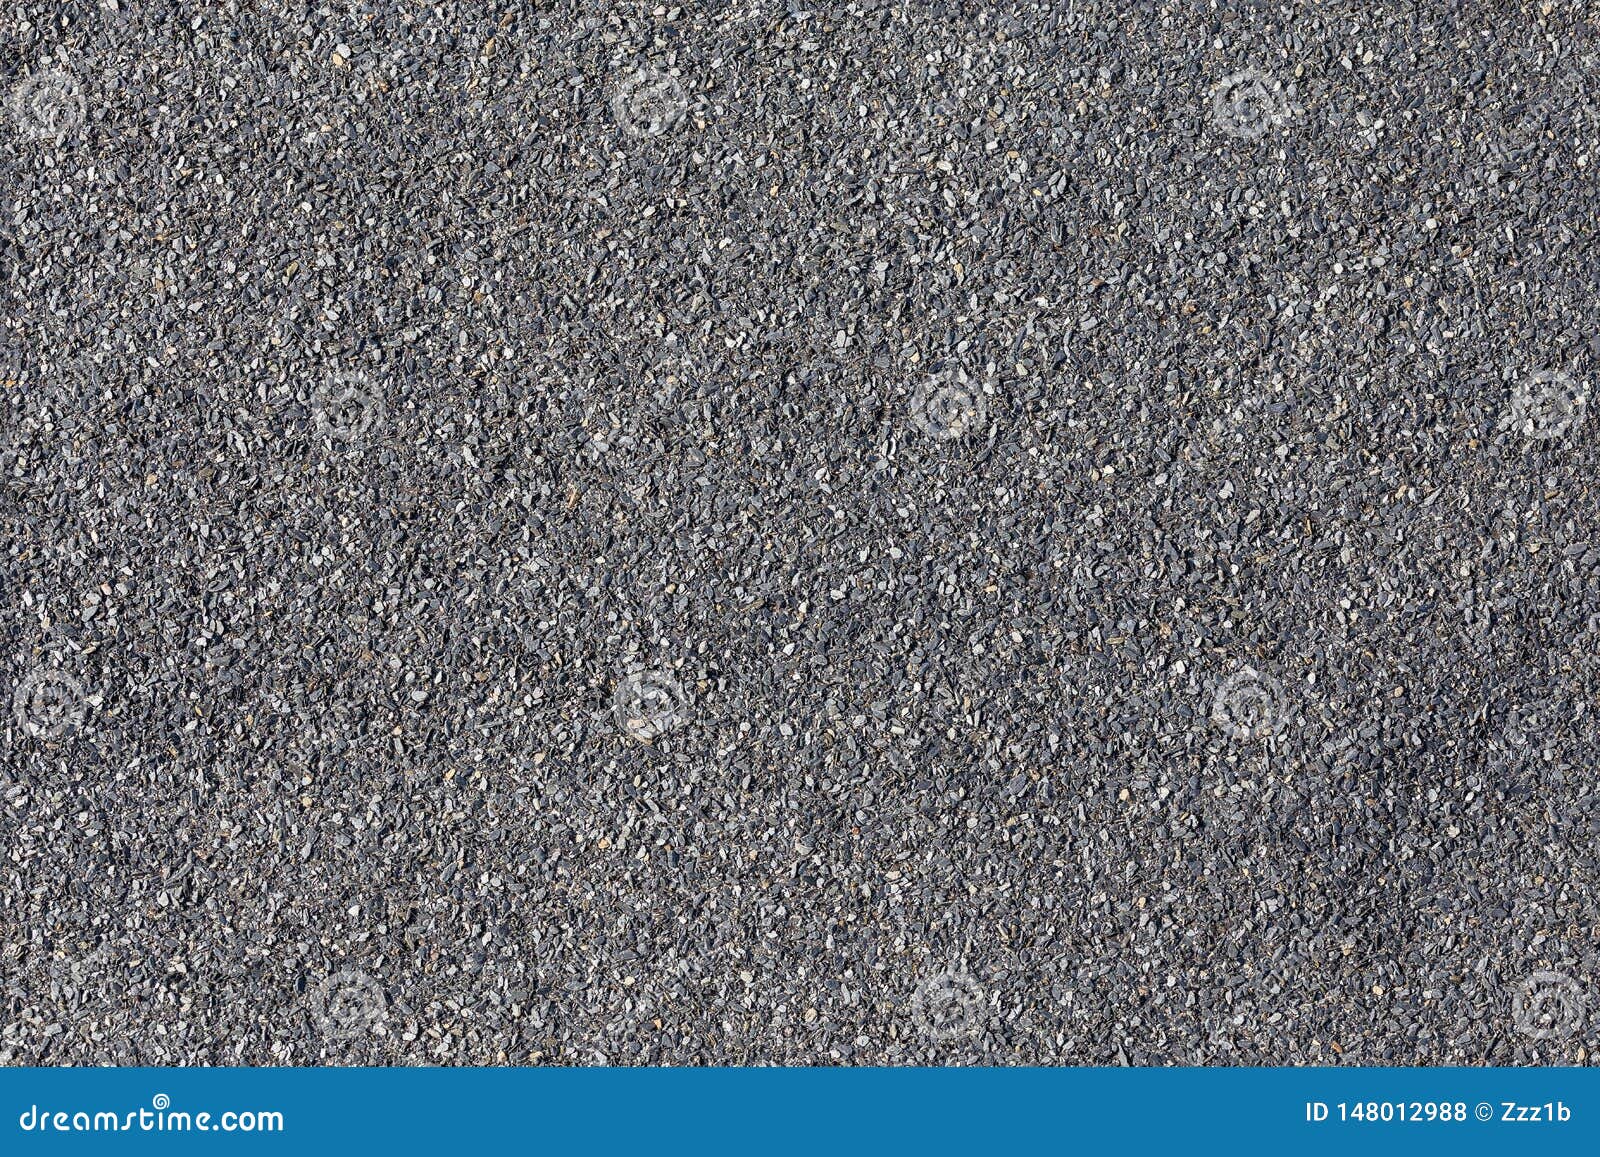 gray ruberoid roof cover closeup seamless texture